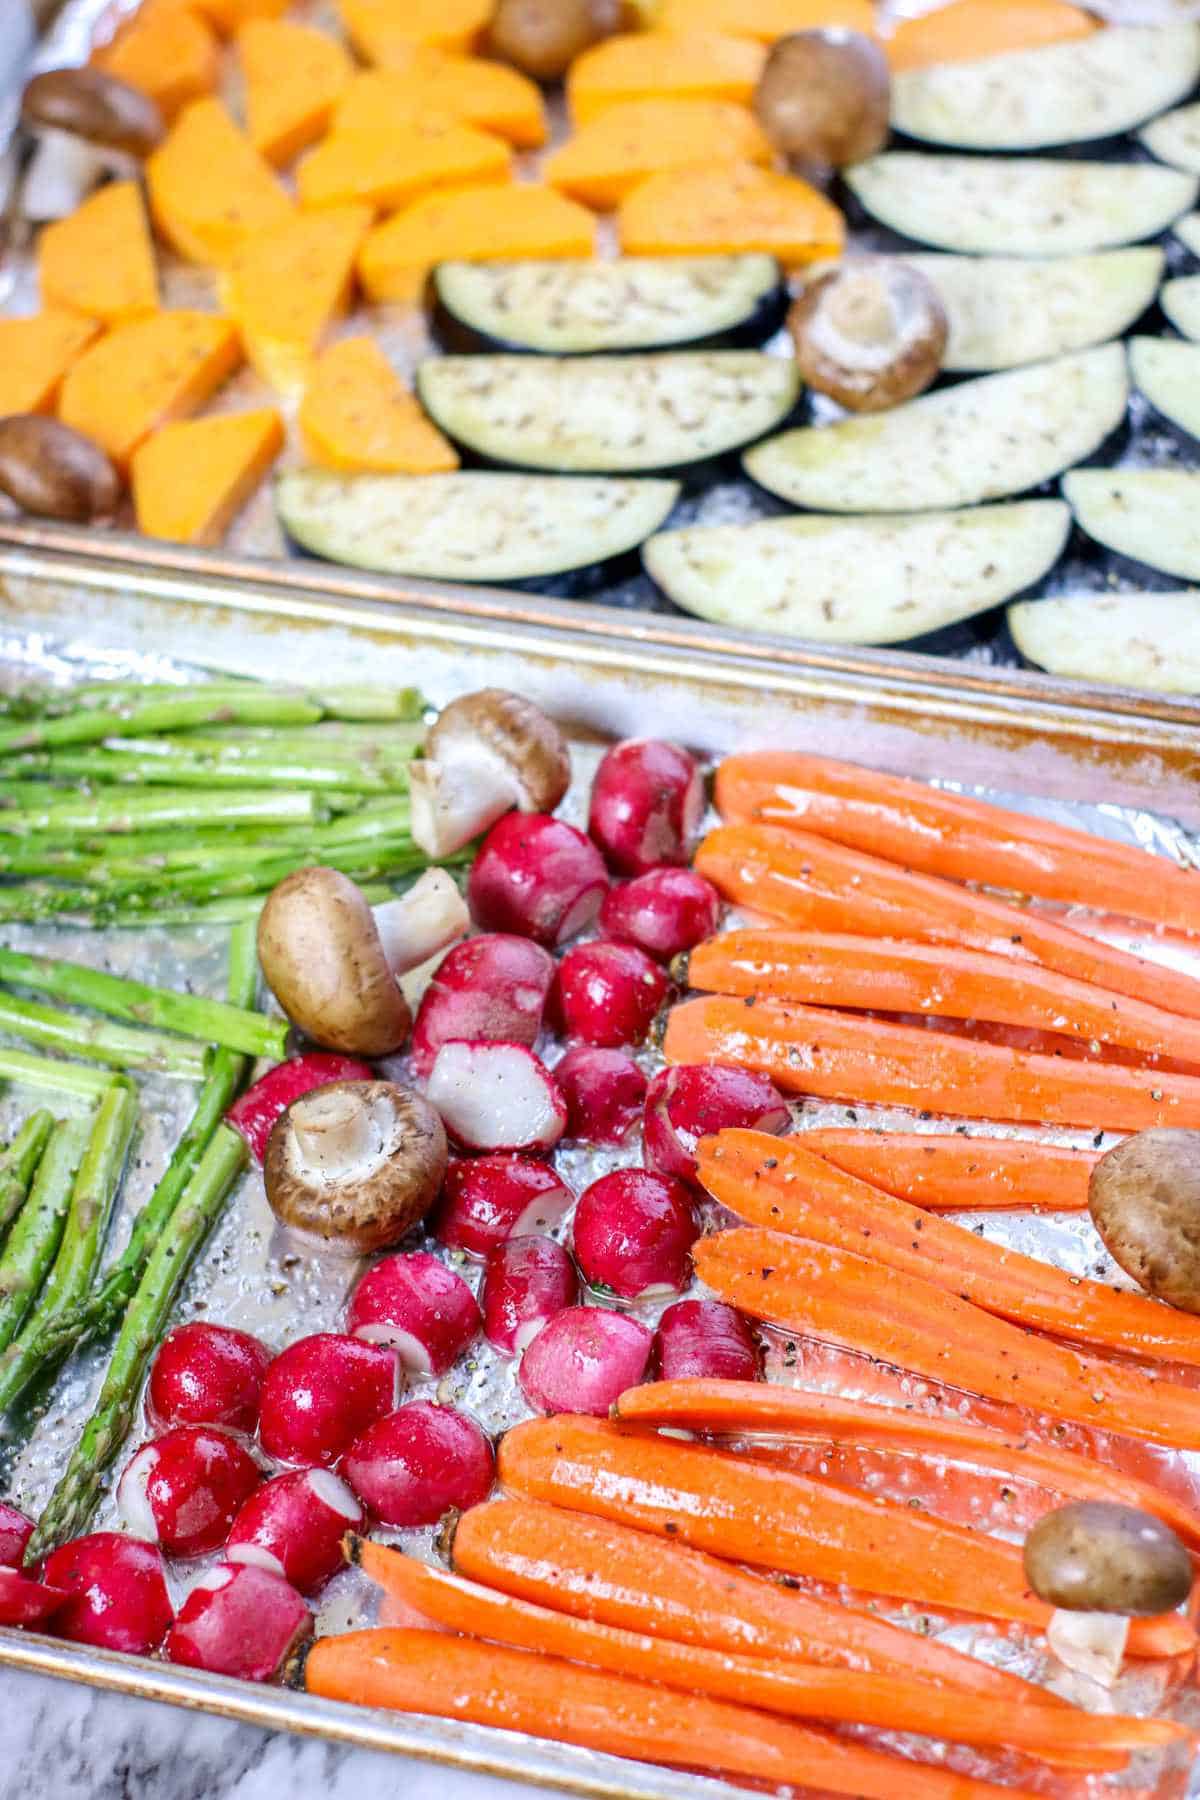 sheet pans coated with aluminum foil with seasoned raw vegetable spread out on them.